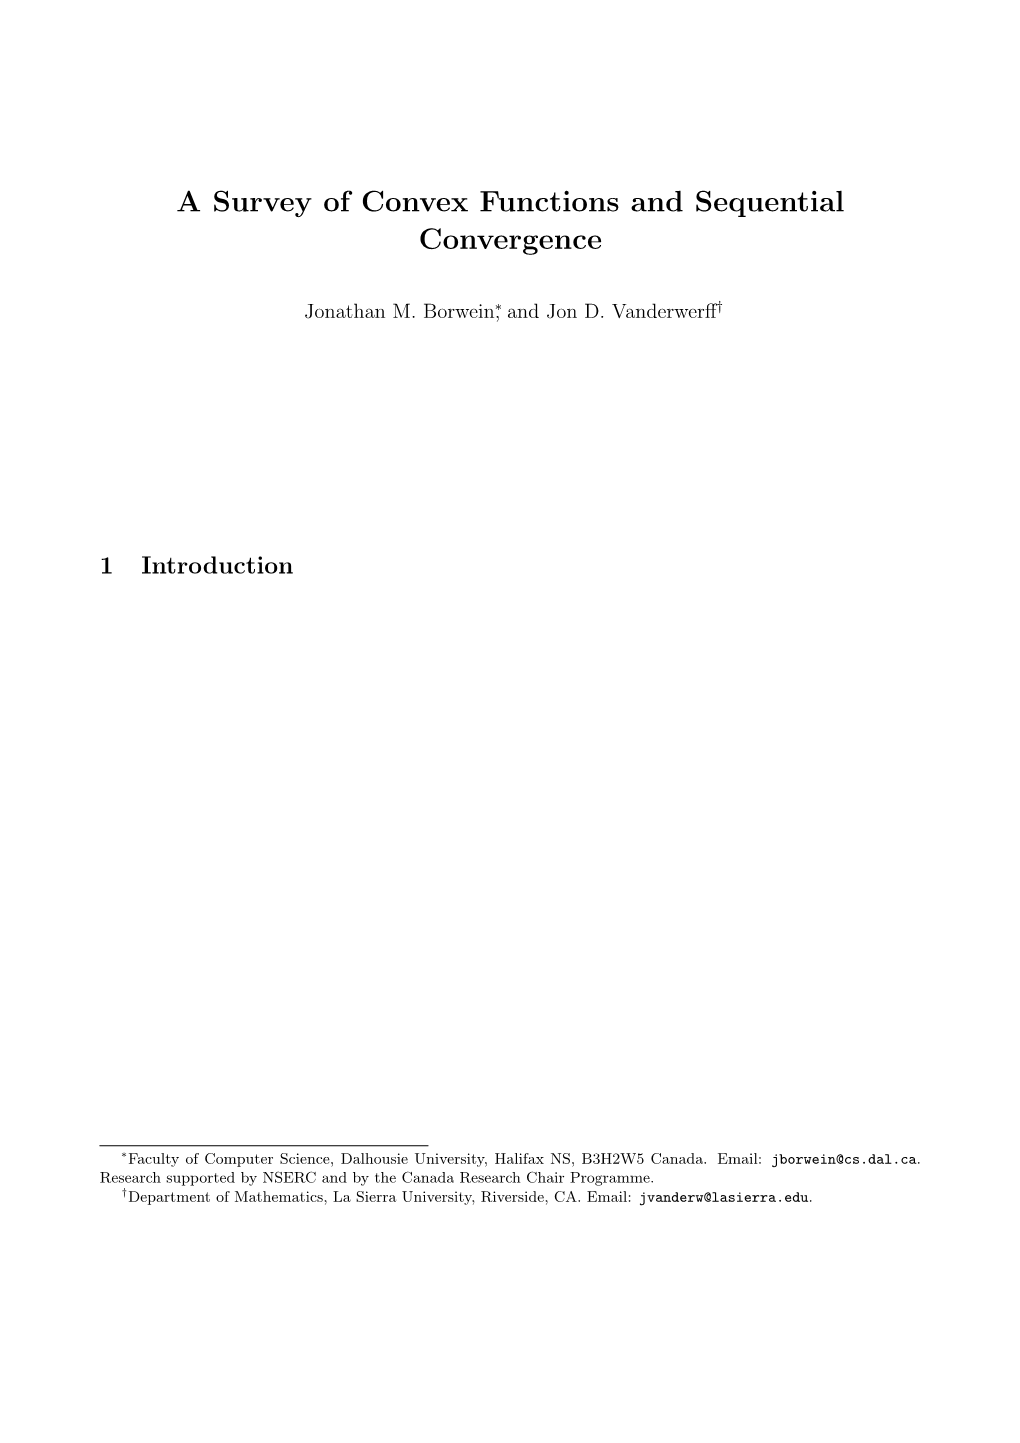 A Survey of Convex Functions and Sequential Convergence